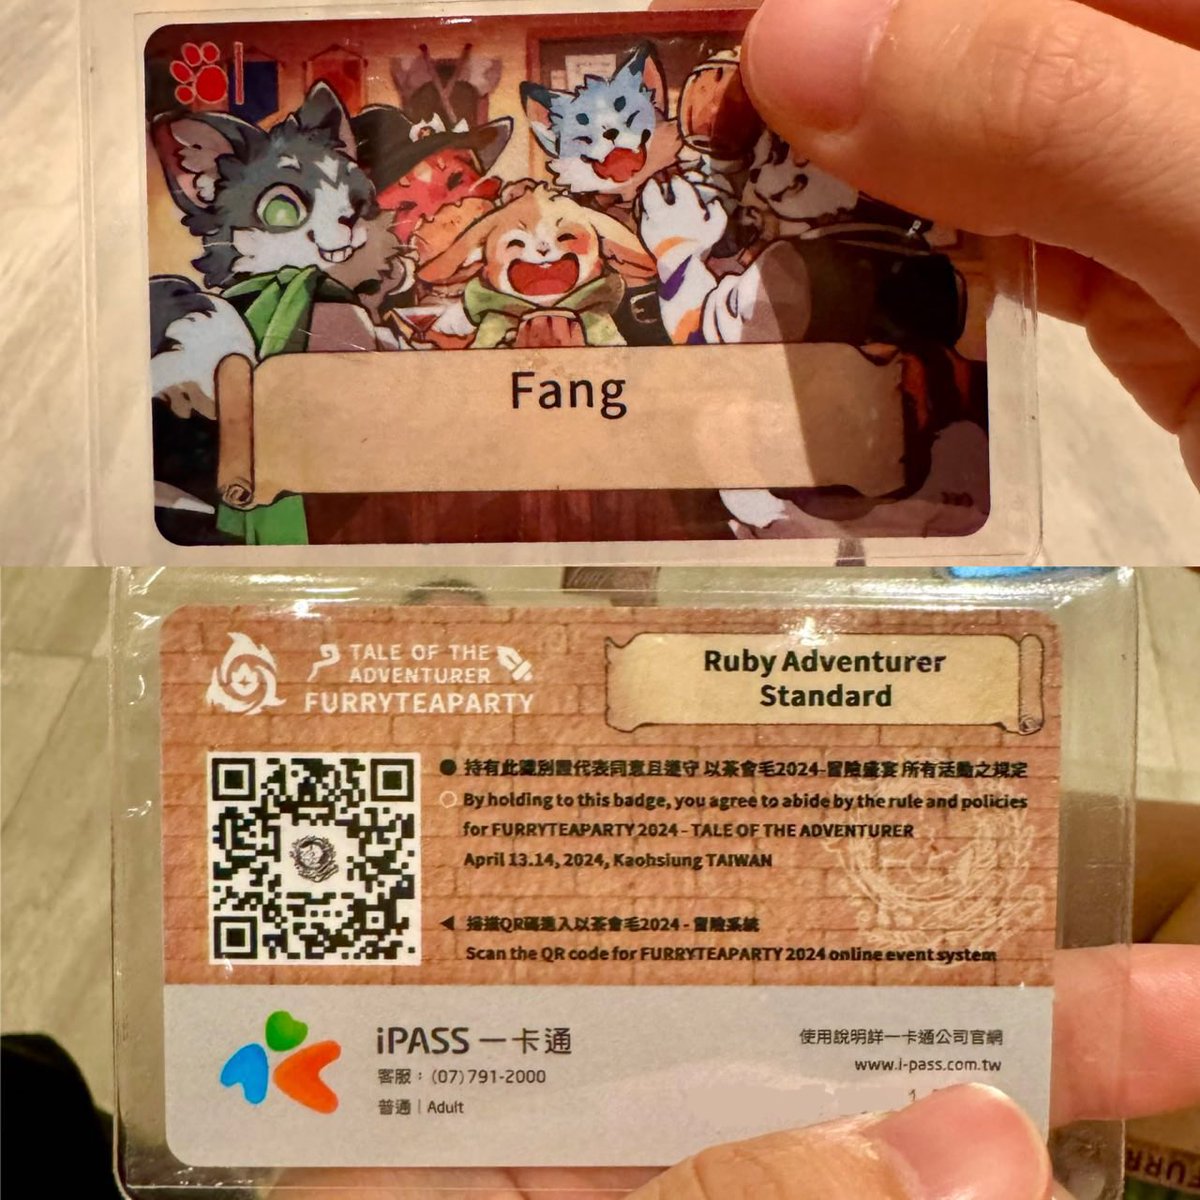 I forgot to post this earlier but : something I really liked about FTP is that your con badge can also function as a public transportation card , it’s so cool!!